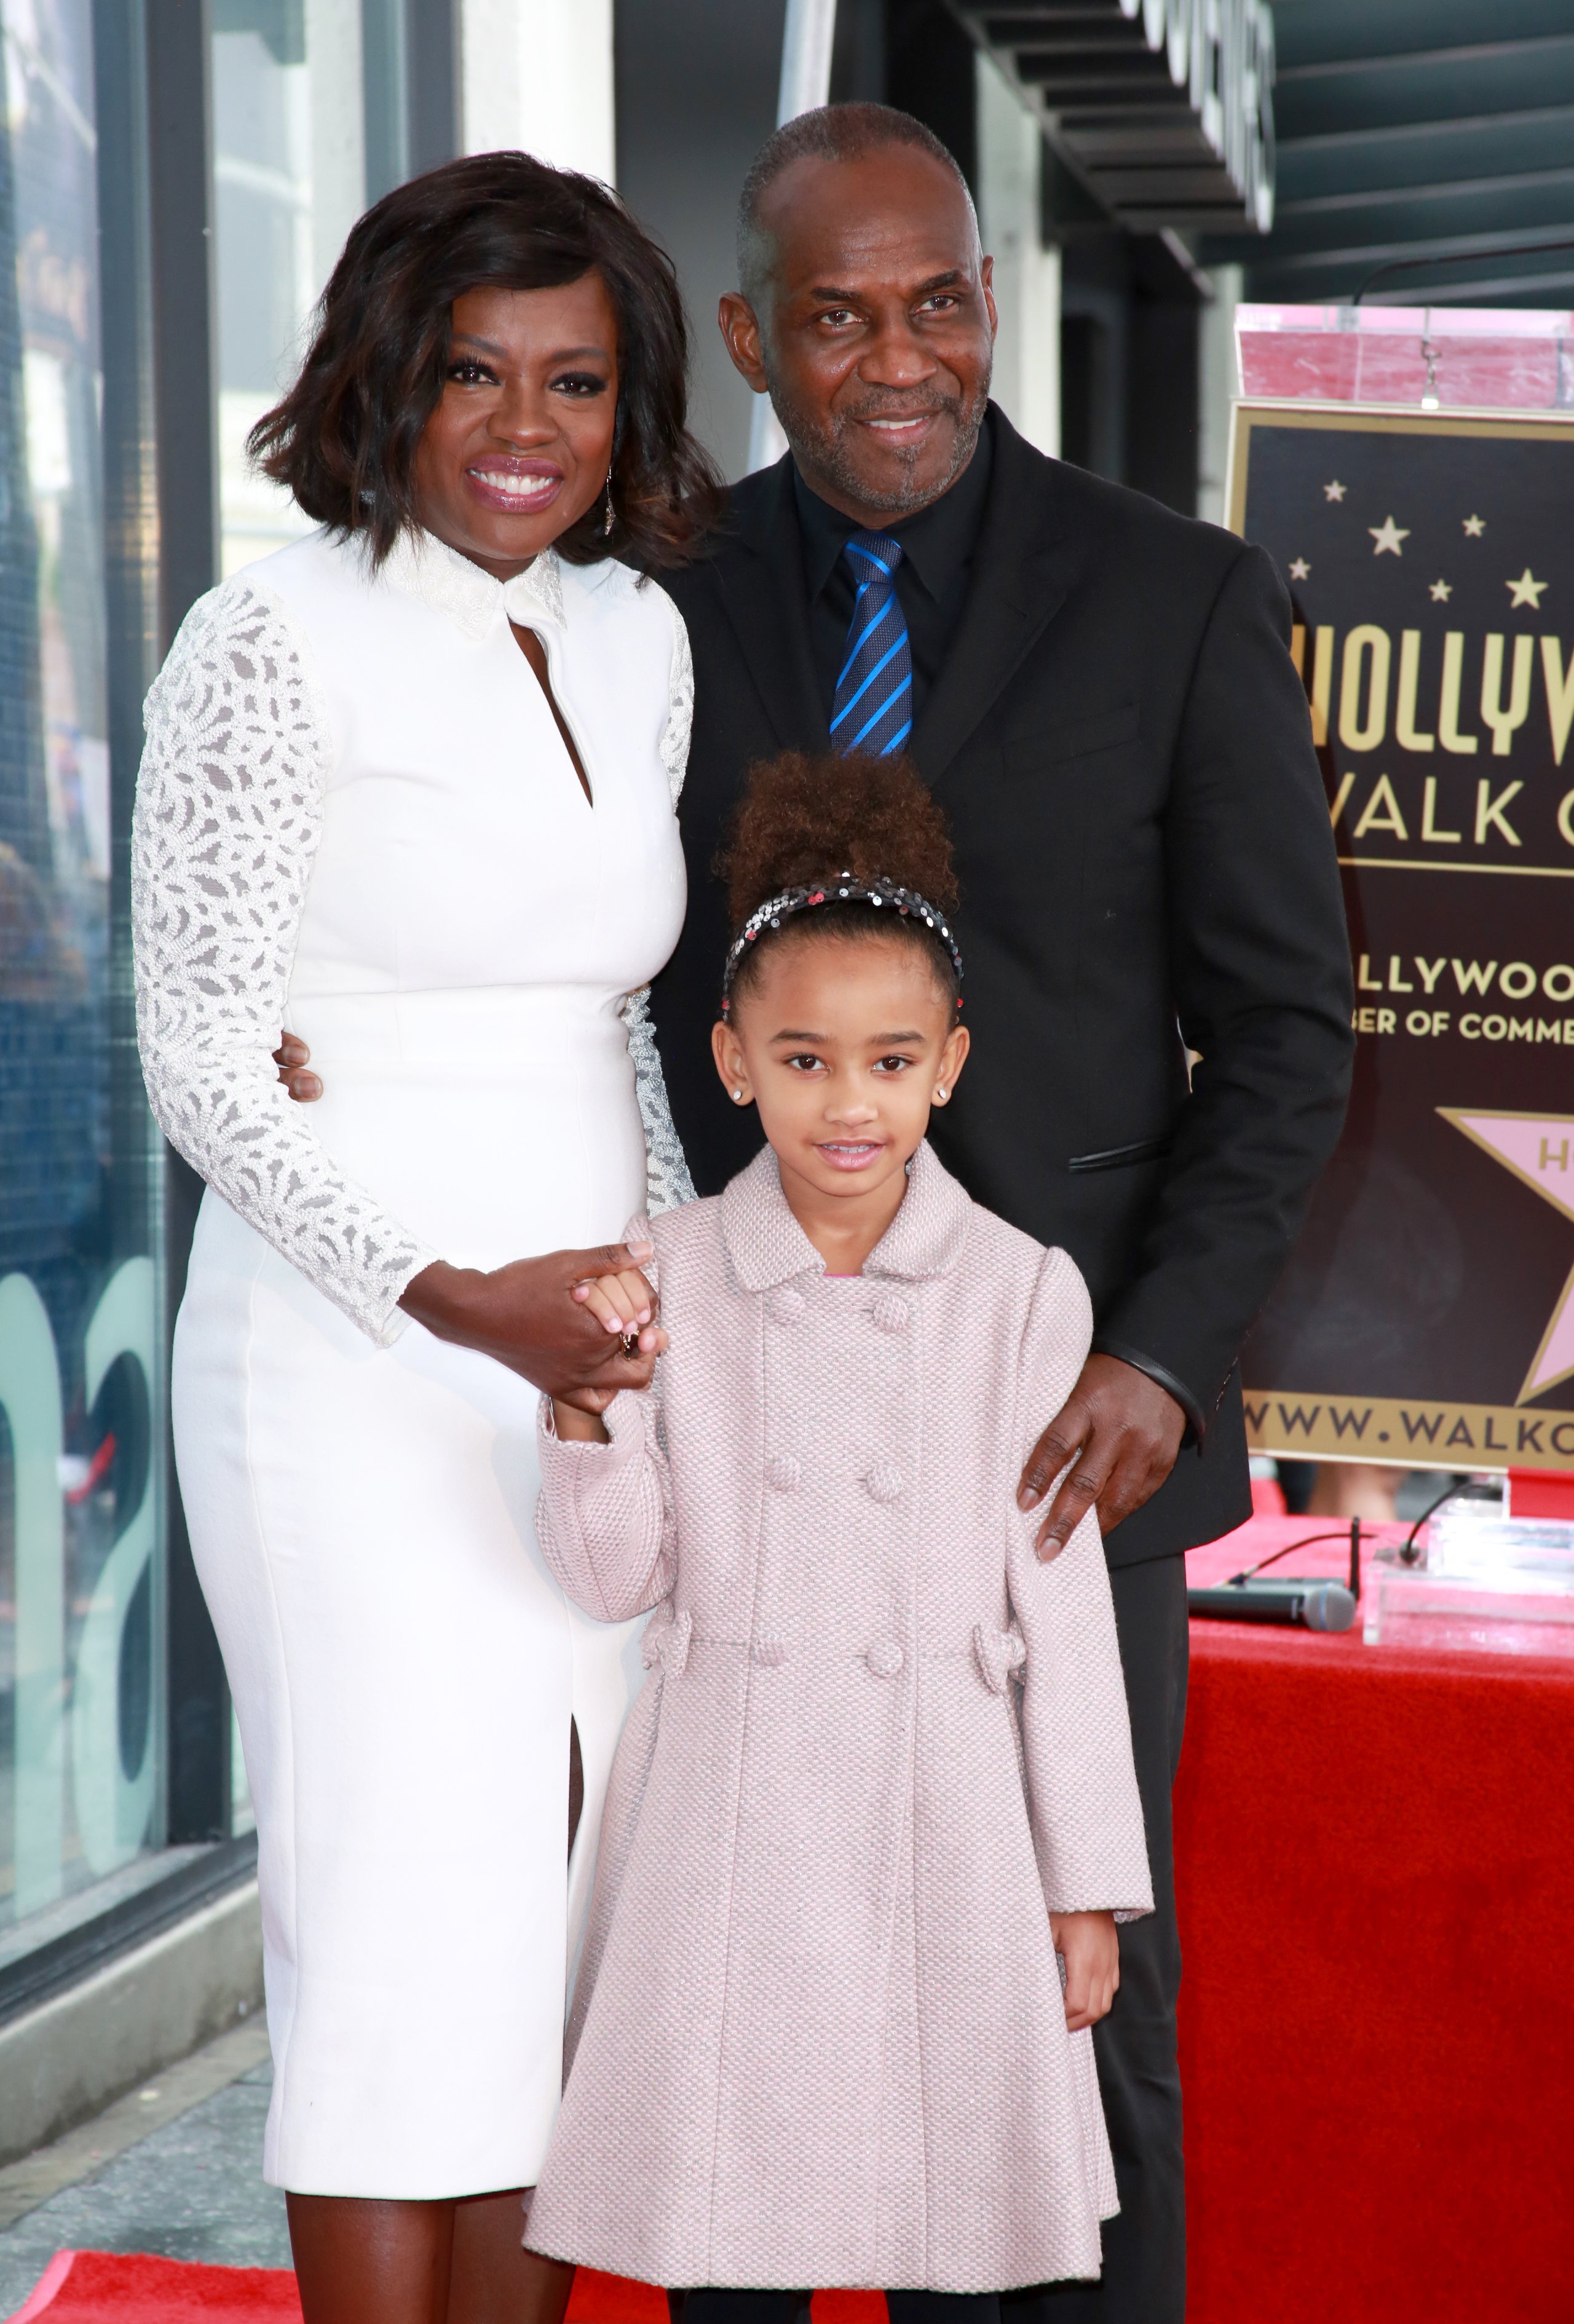 Actress Viola Davis, actor Julius Tennon and Genesis Tennon attend the Viola Davis Walk Of Fame Ceremony at Hollywood Walk Of Fame on January 5, 2017|Photo: Getty Images